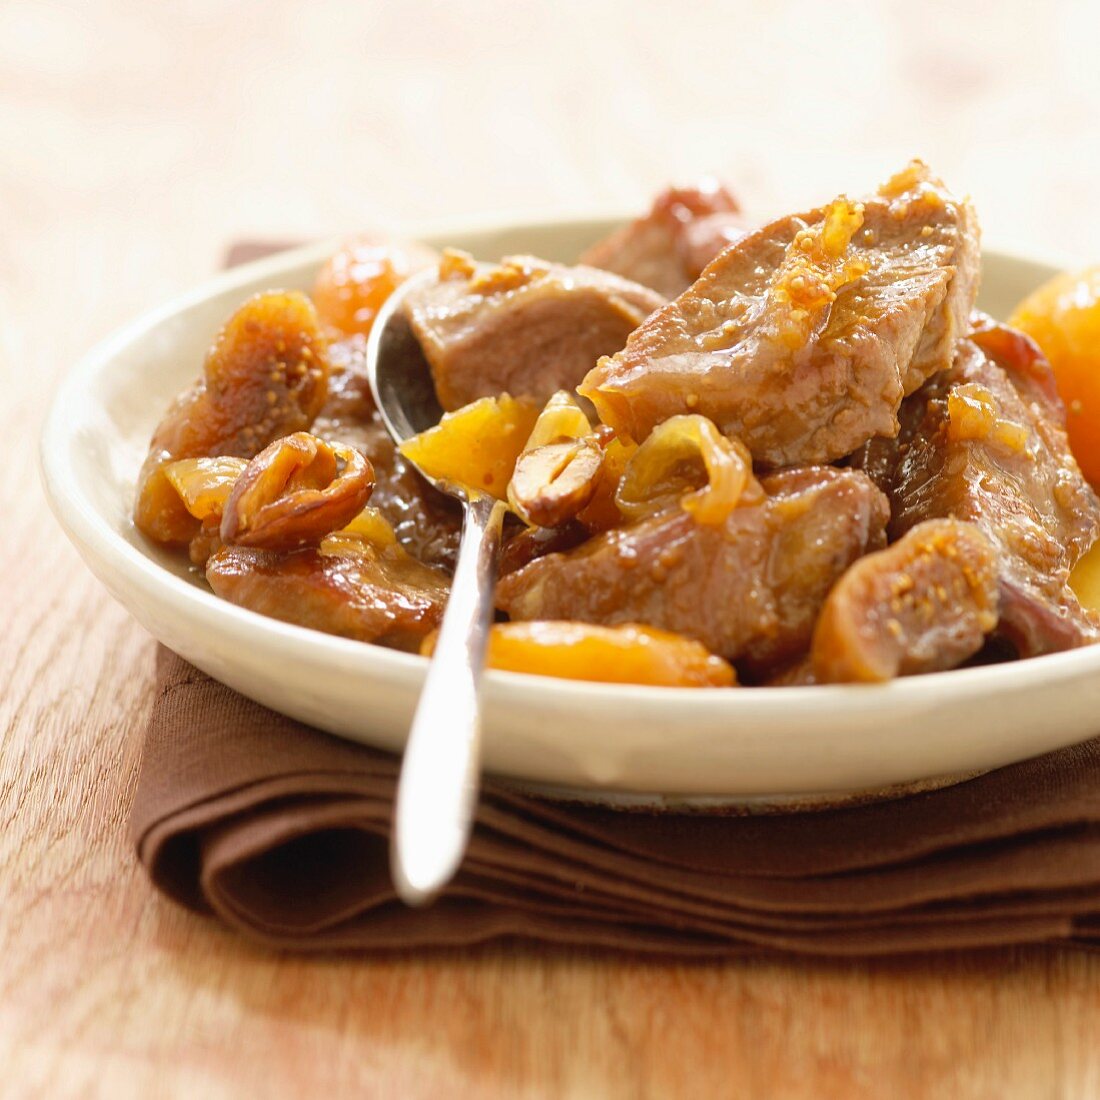 Bourbonnais lamb stew with dried fruit and onions